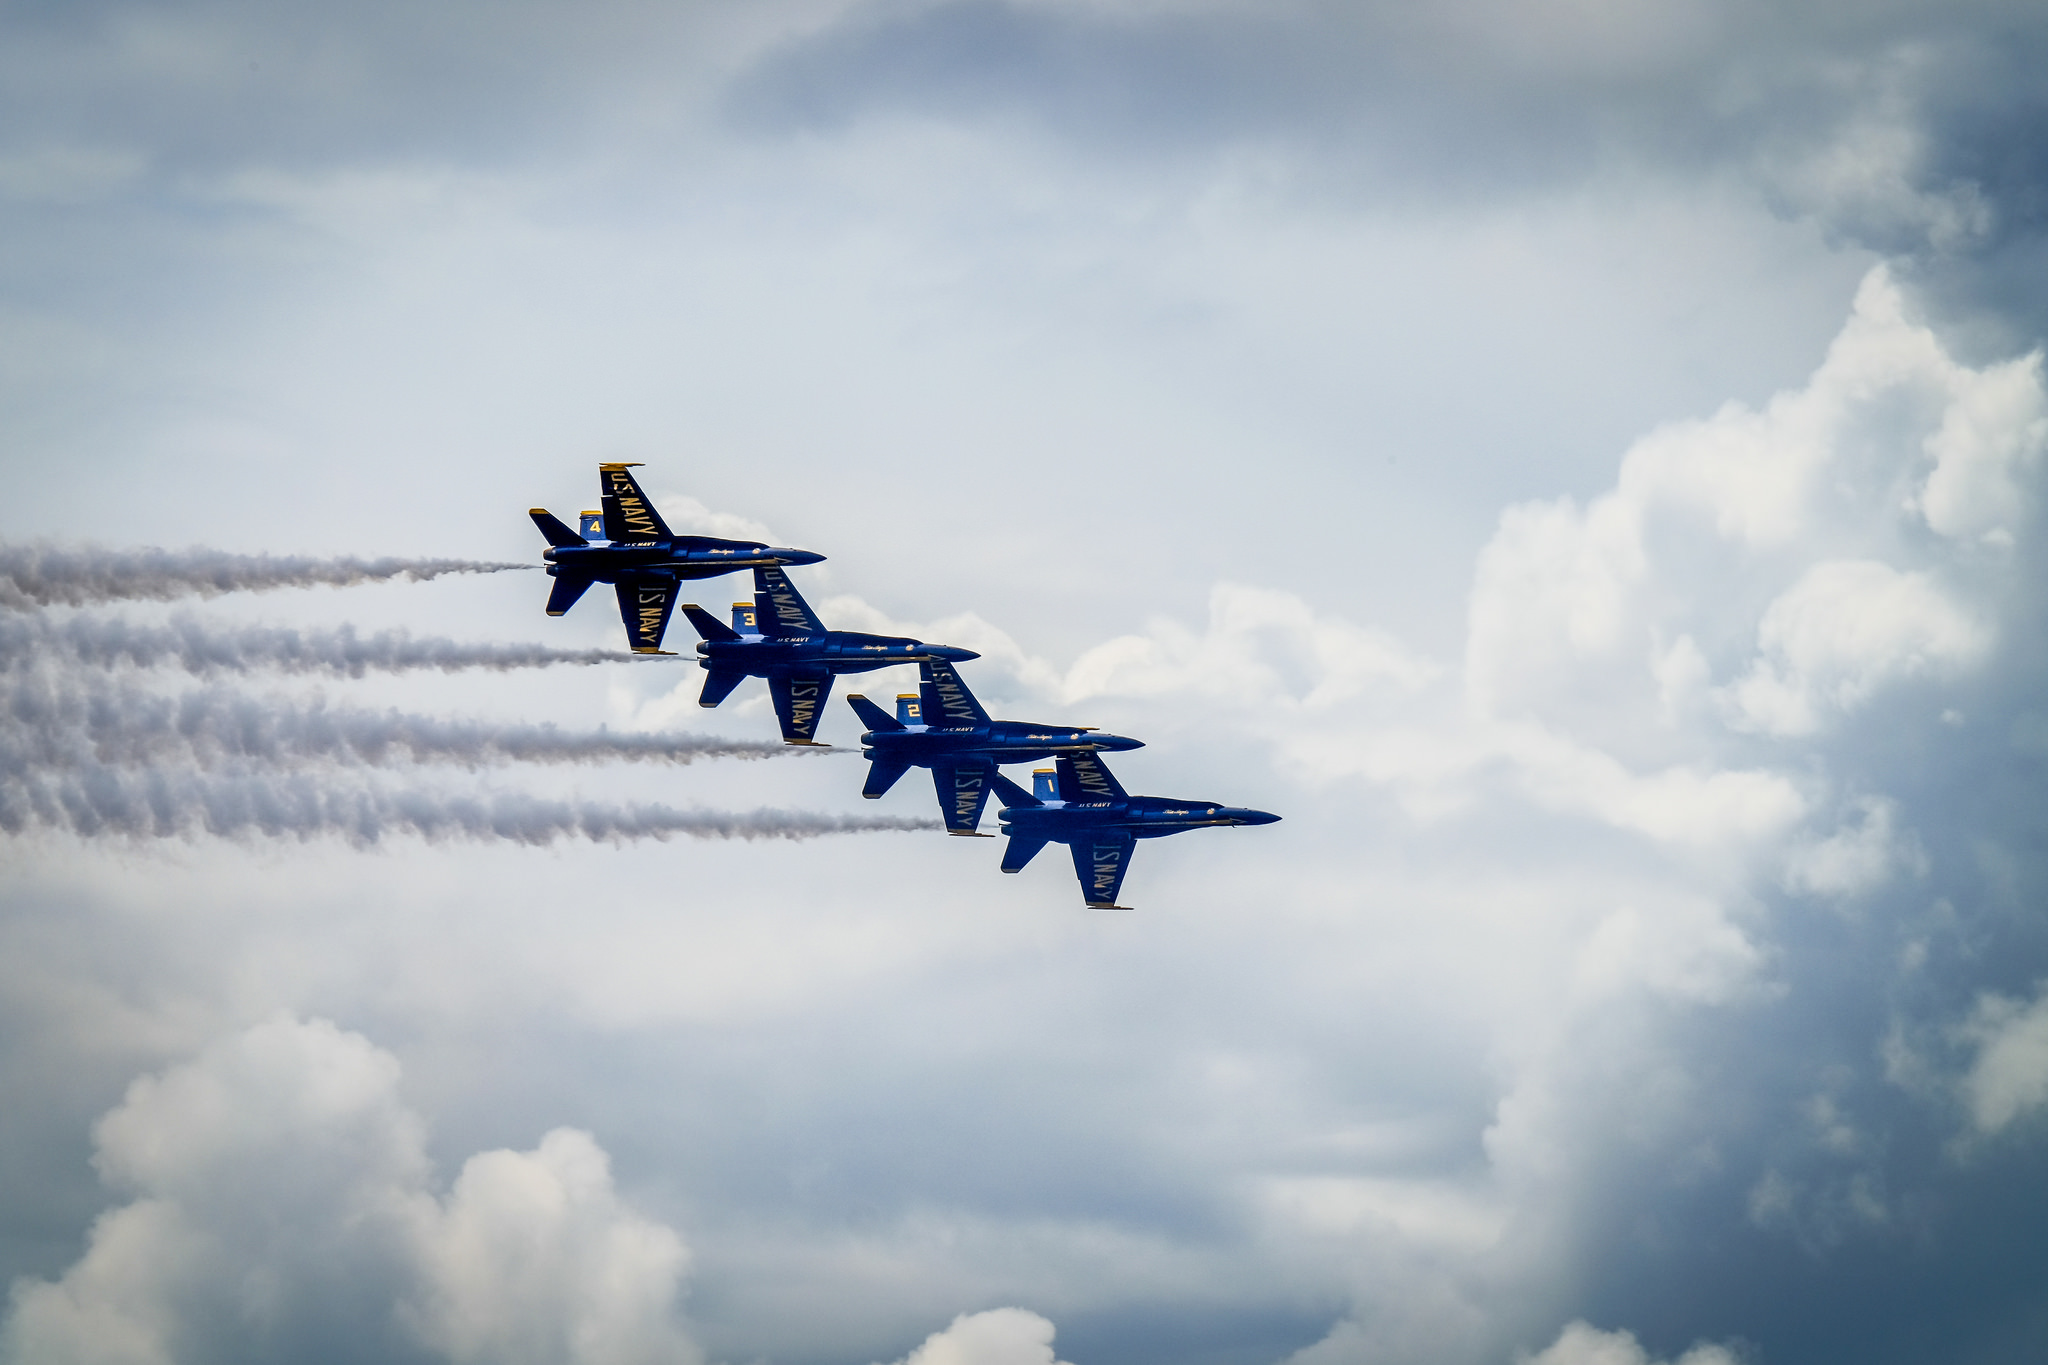 military, air show, aircraft, blue angels, jet fighter, navy, military aircraft